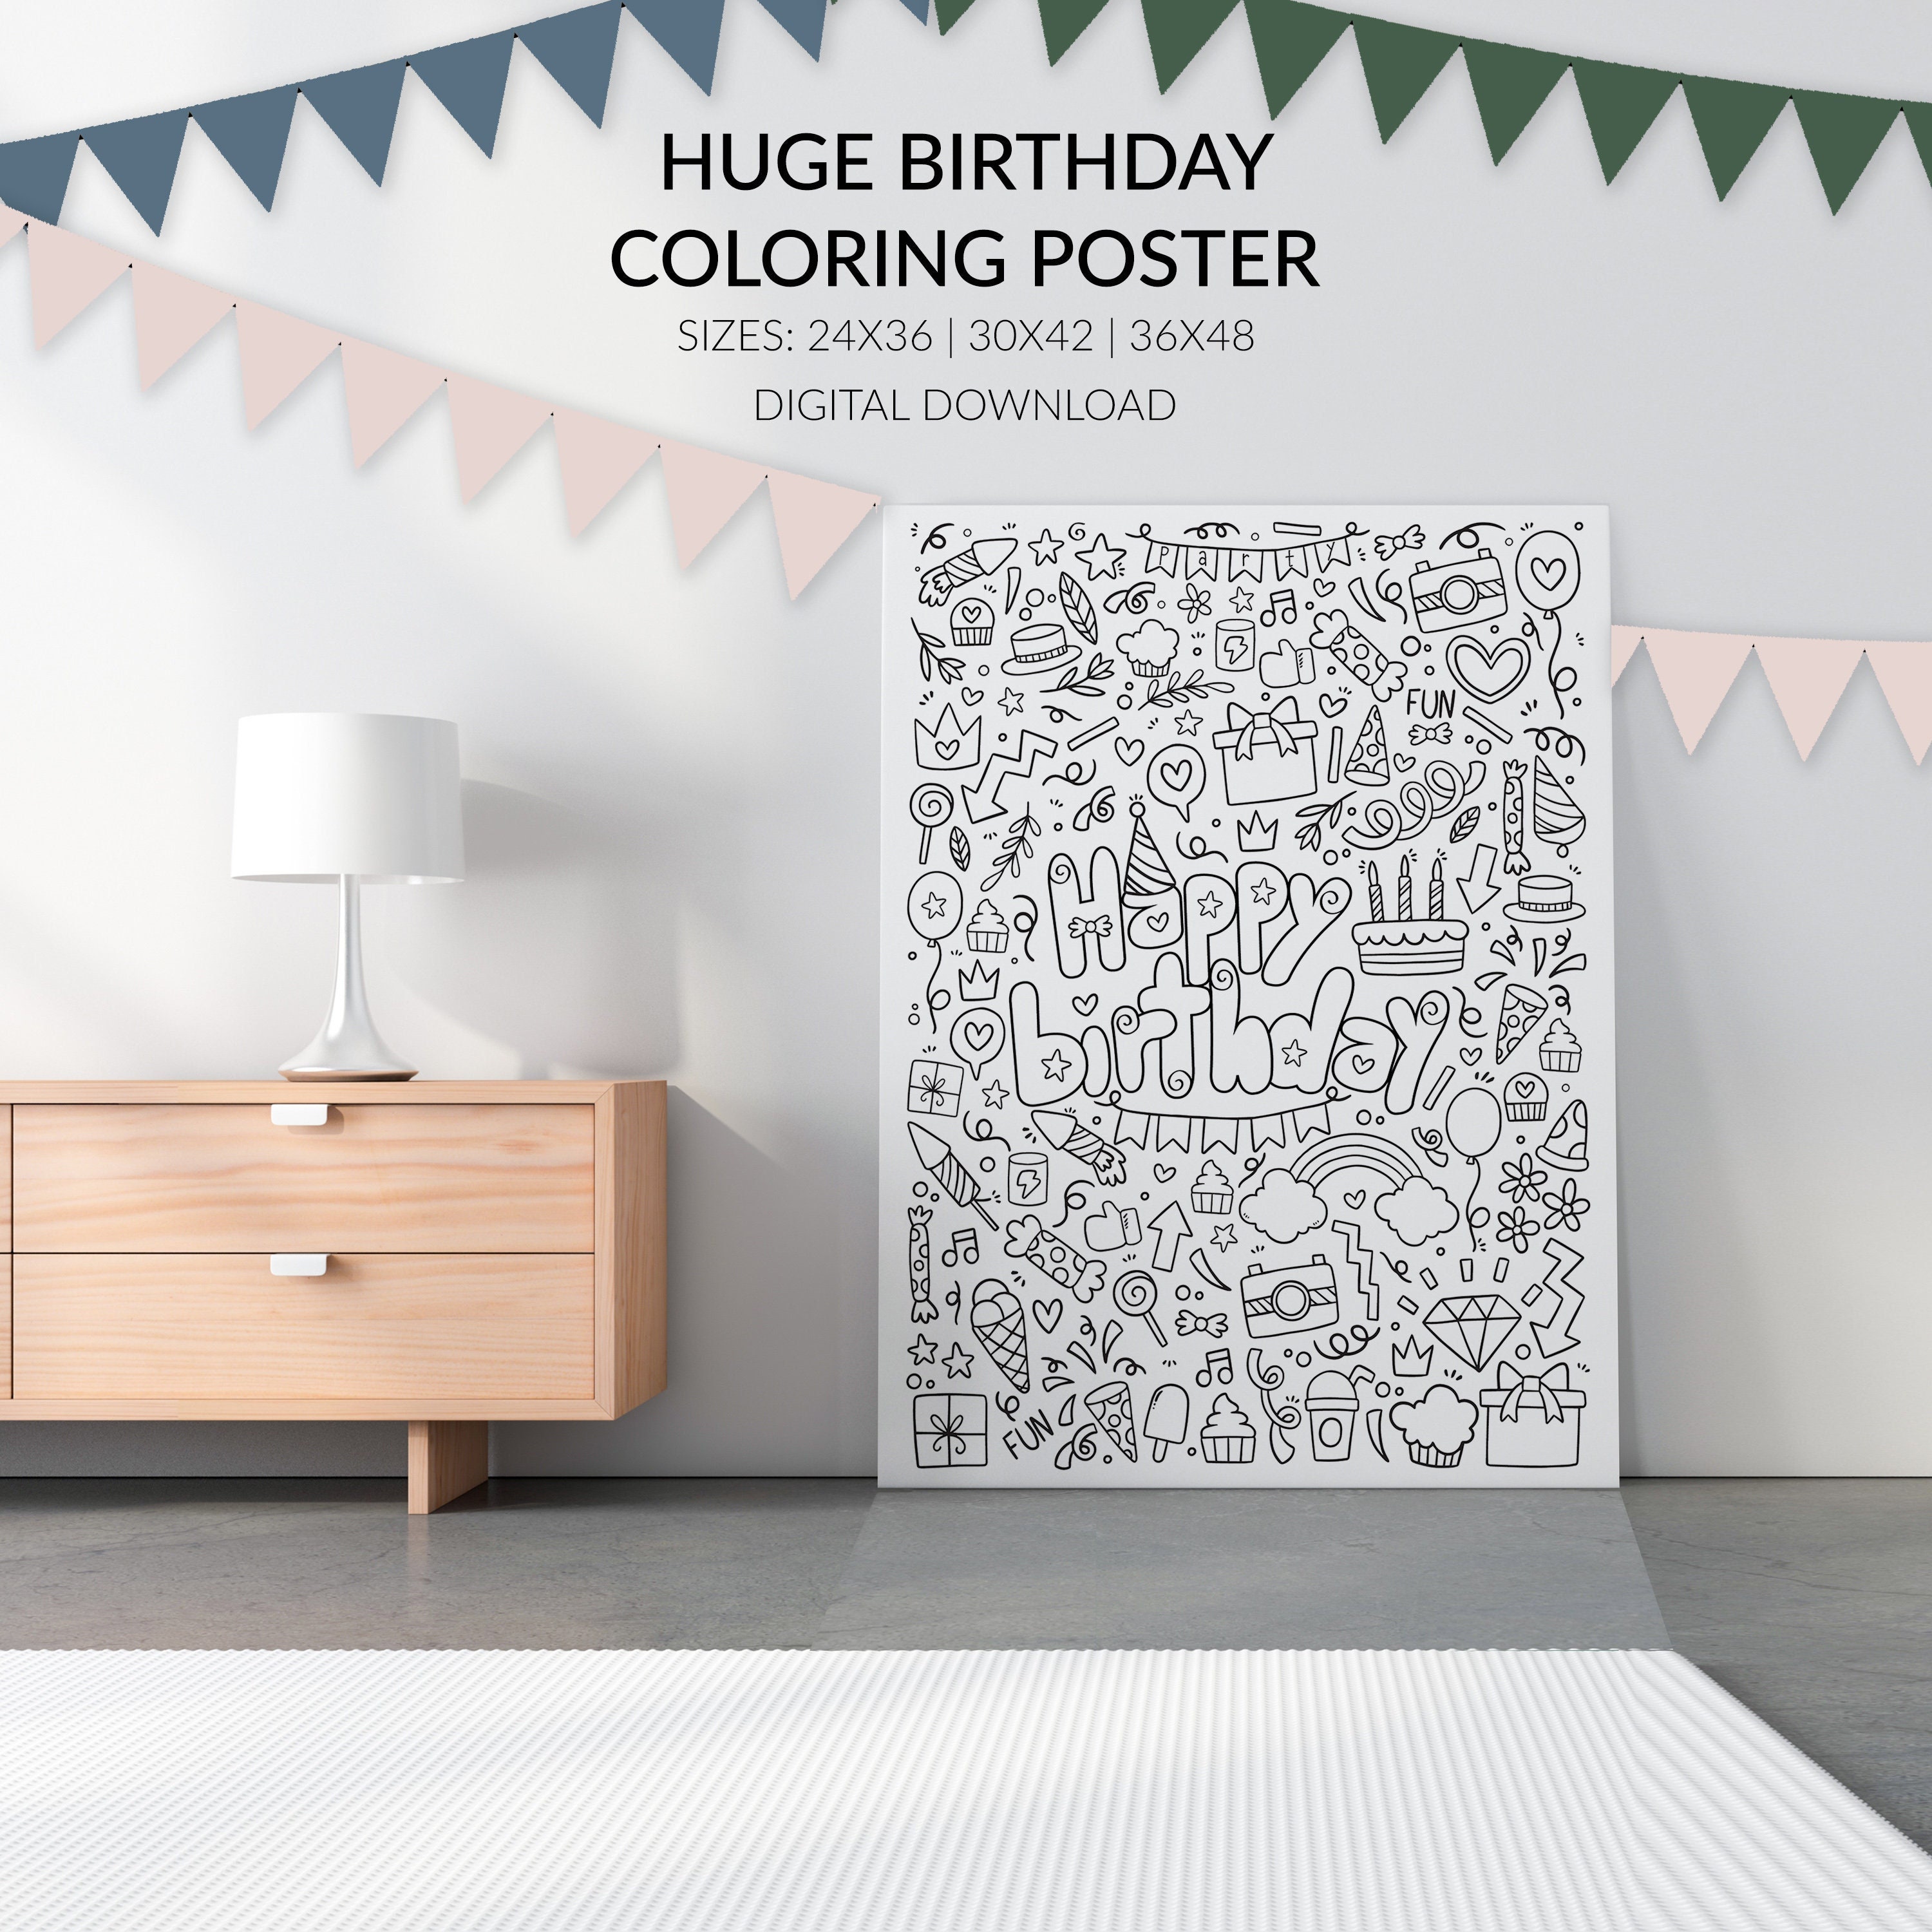 Background 23 Custom Personalized Giant Coloring Poster 48x63